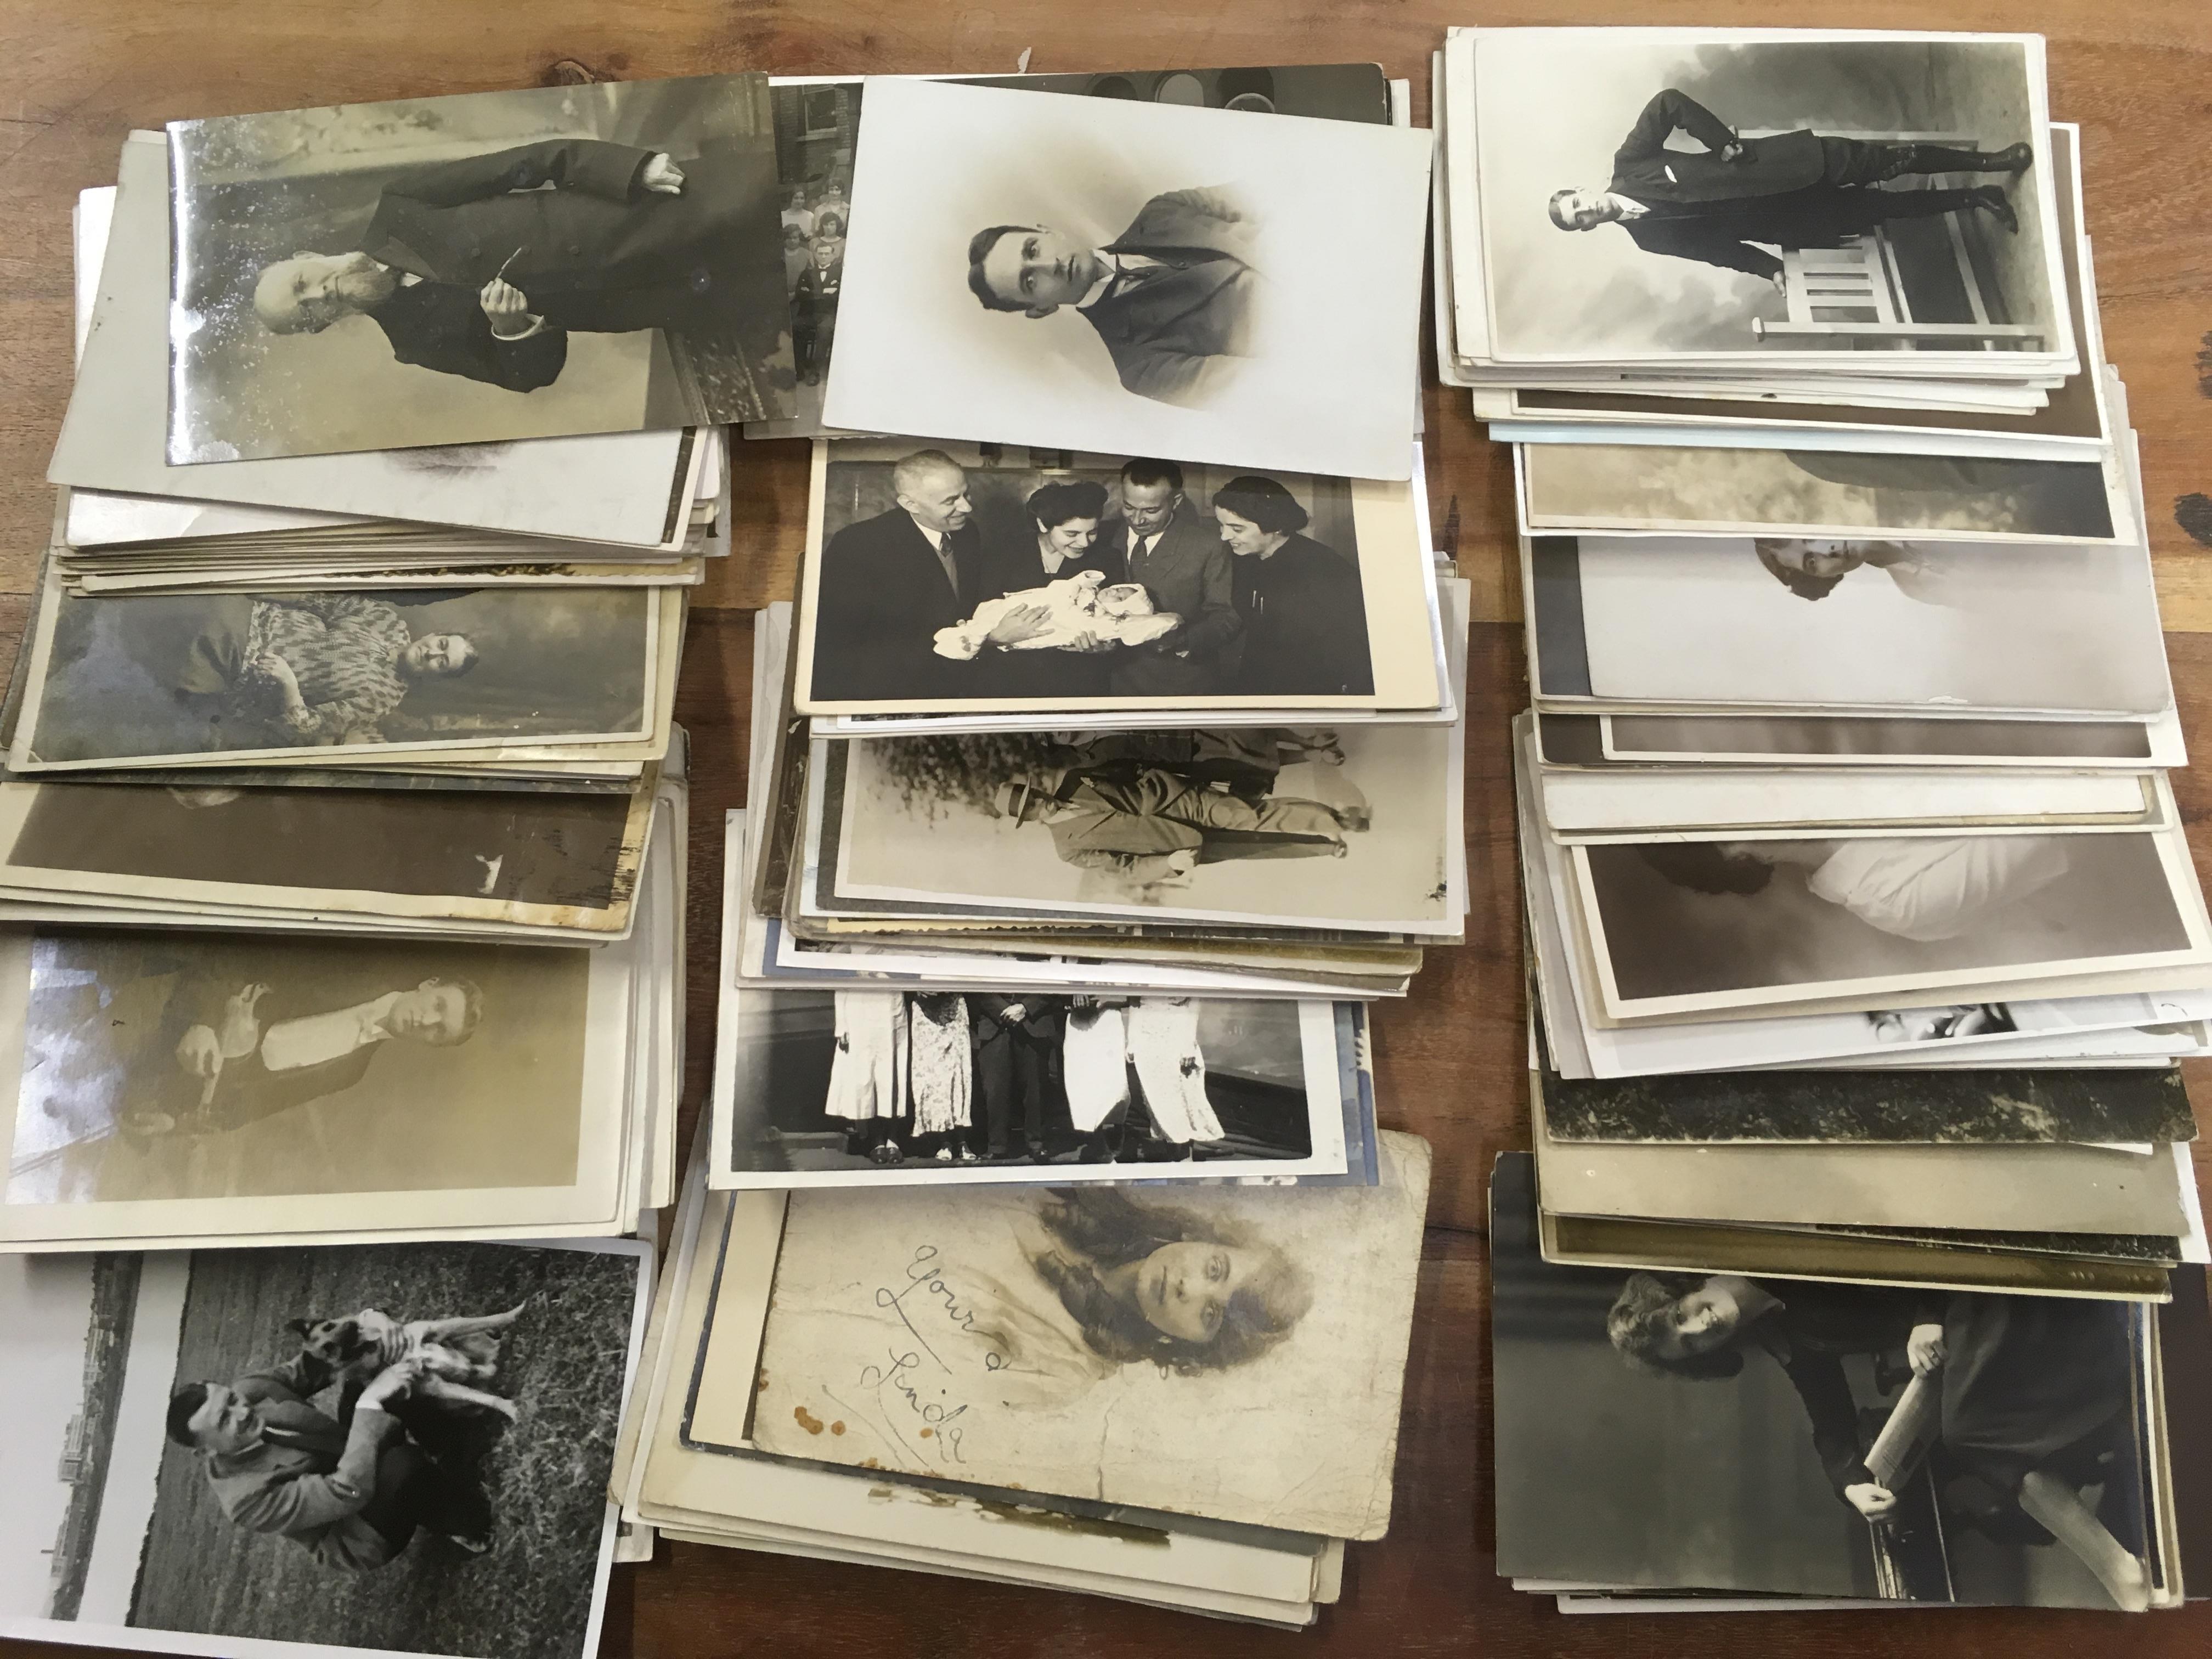 BOX OF POSTCARDS WITH SOCIAL HISTORY PORTRAITS, FEW SHIPS, MILITARY ETC ALSO PHOTOGRAPHS ETC. - Image 2 of 3